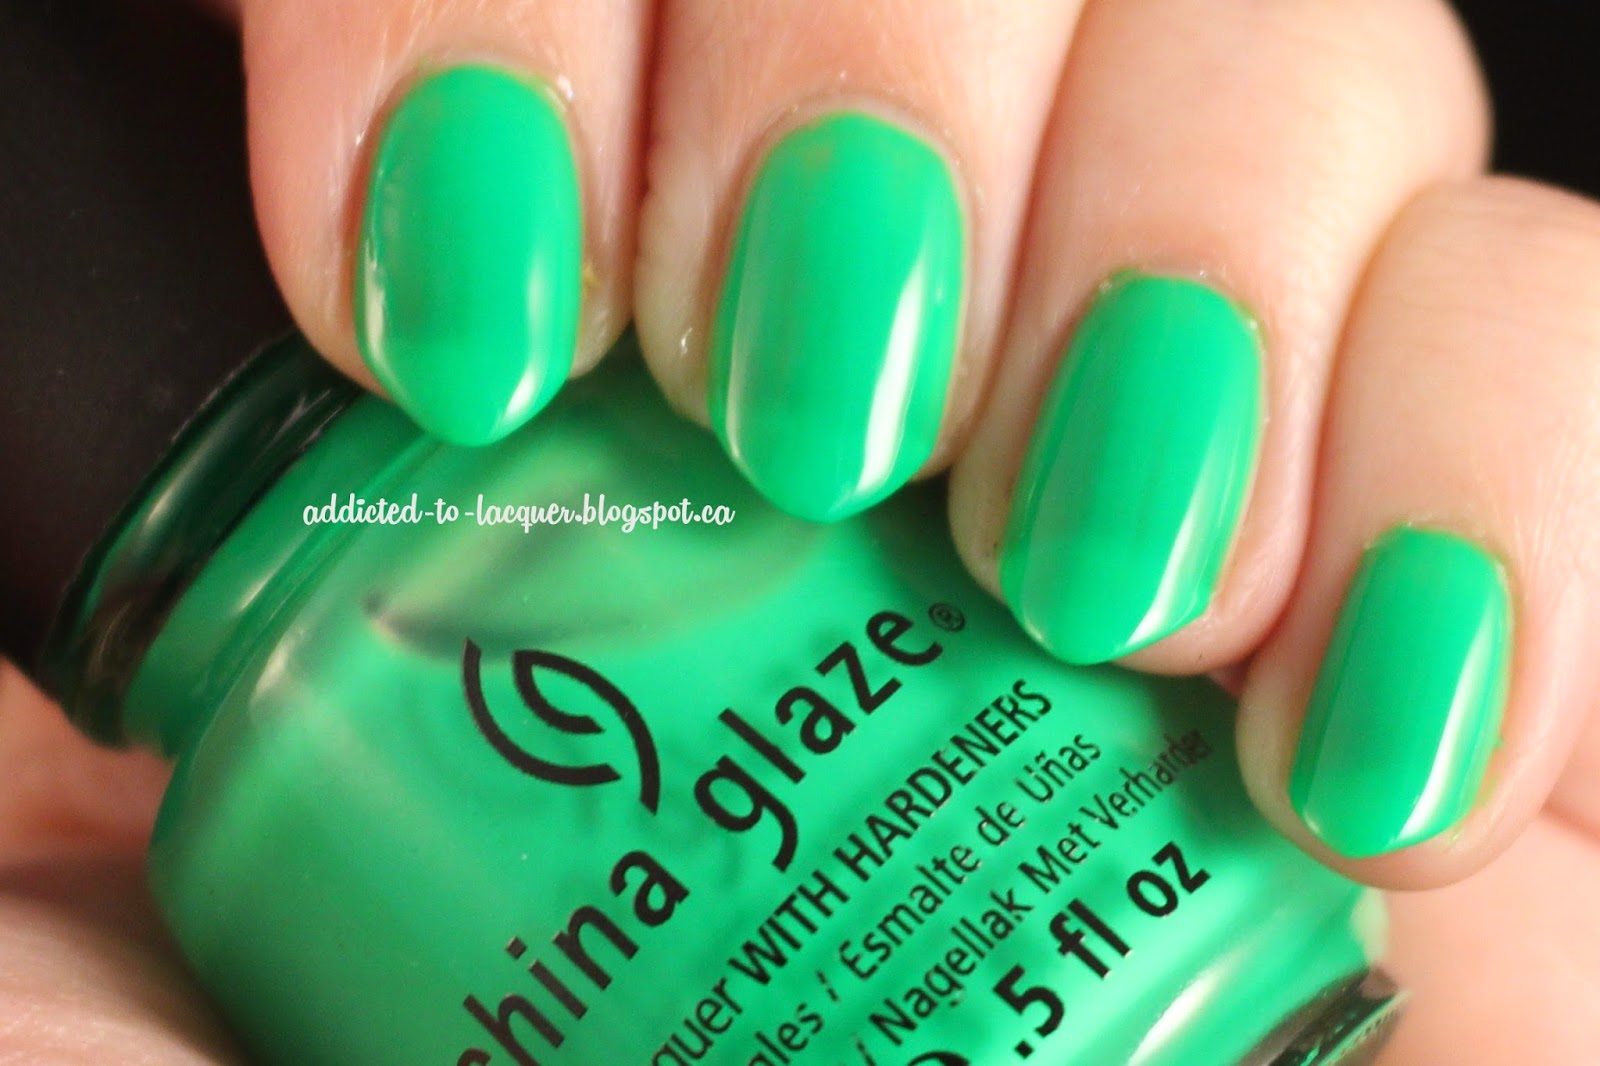 3. China Glaze Nail Lacquer in "Kiwi Cool-Ada" - wide 2